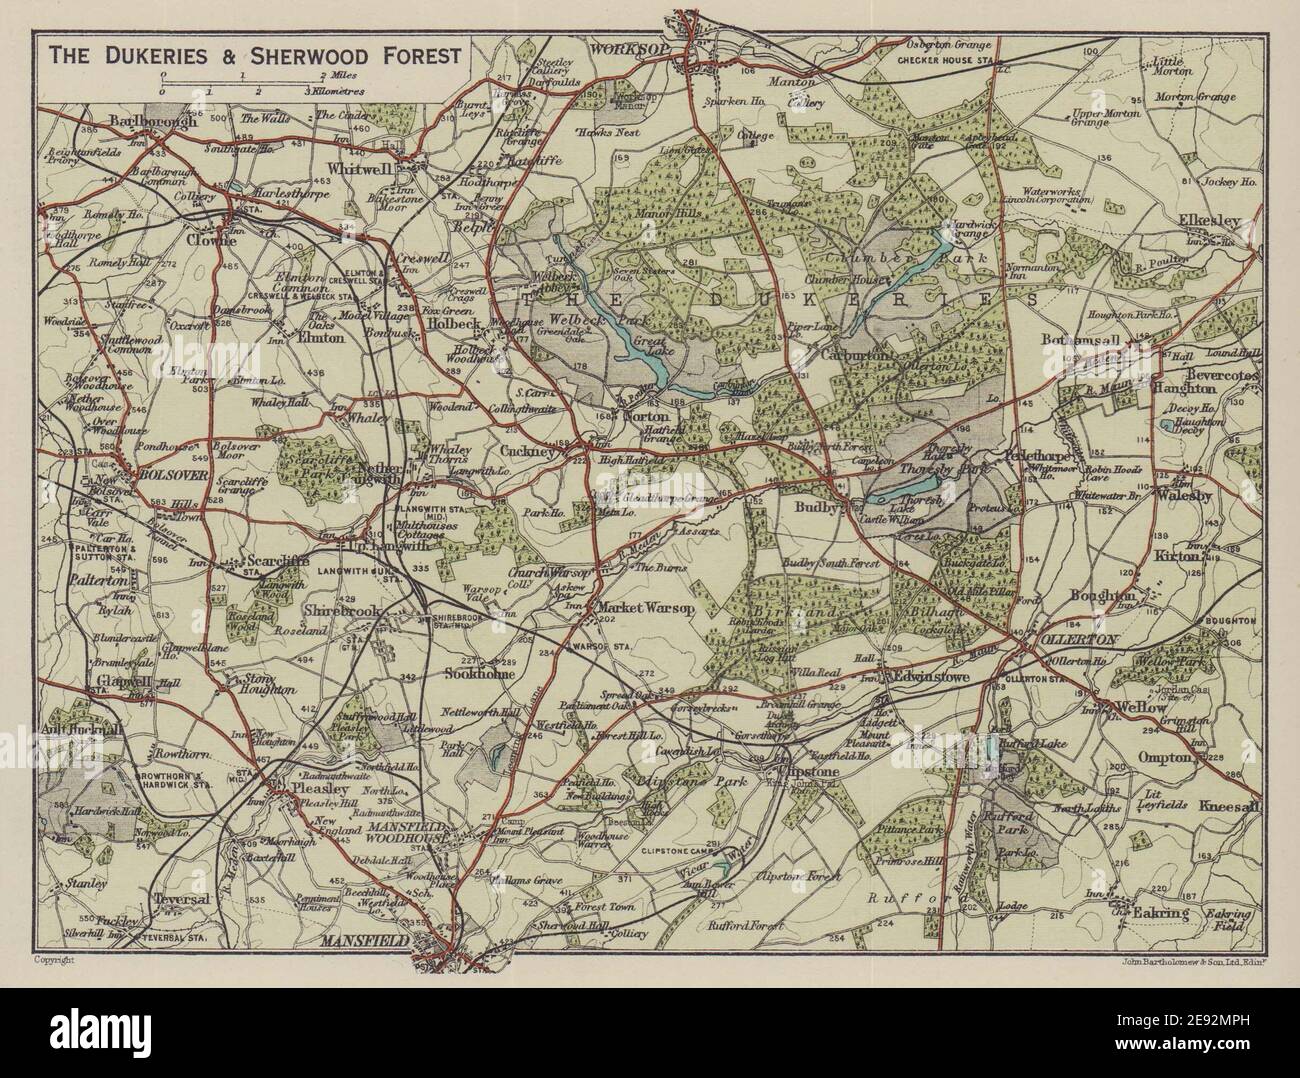 The Dukeries & Sherwood Forest. Mansfield Worksop. Nottinghamshire 1920 map Stock Photo